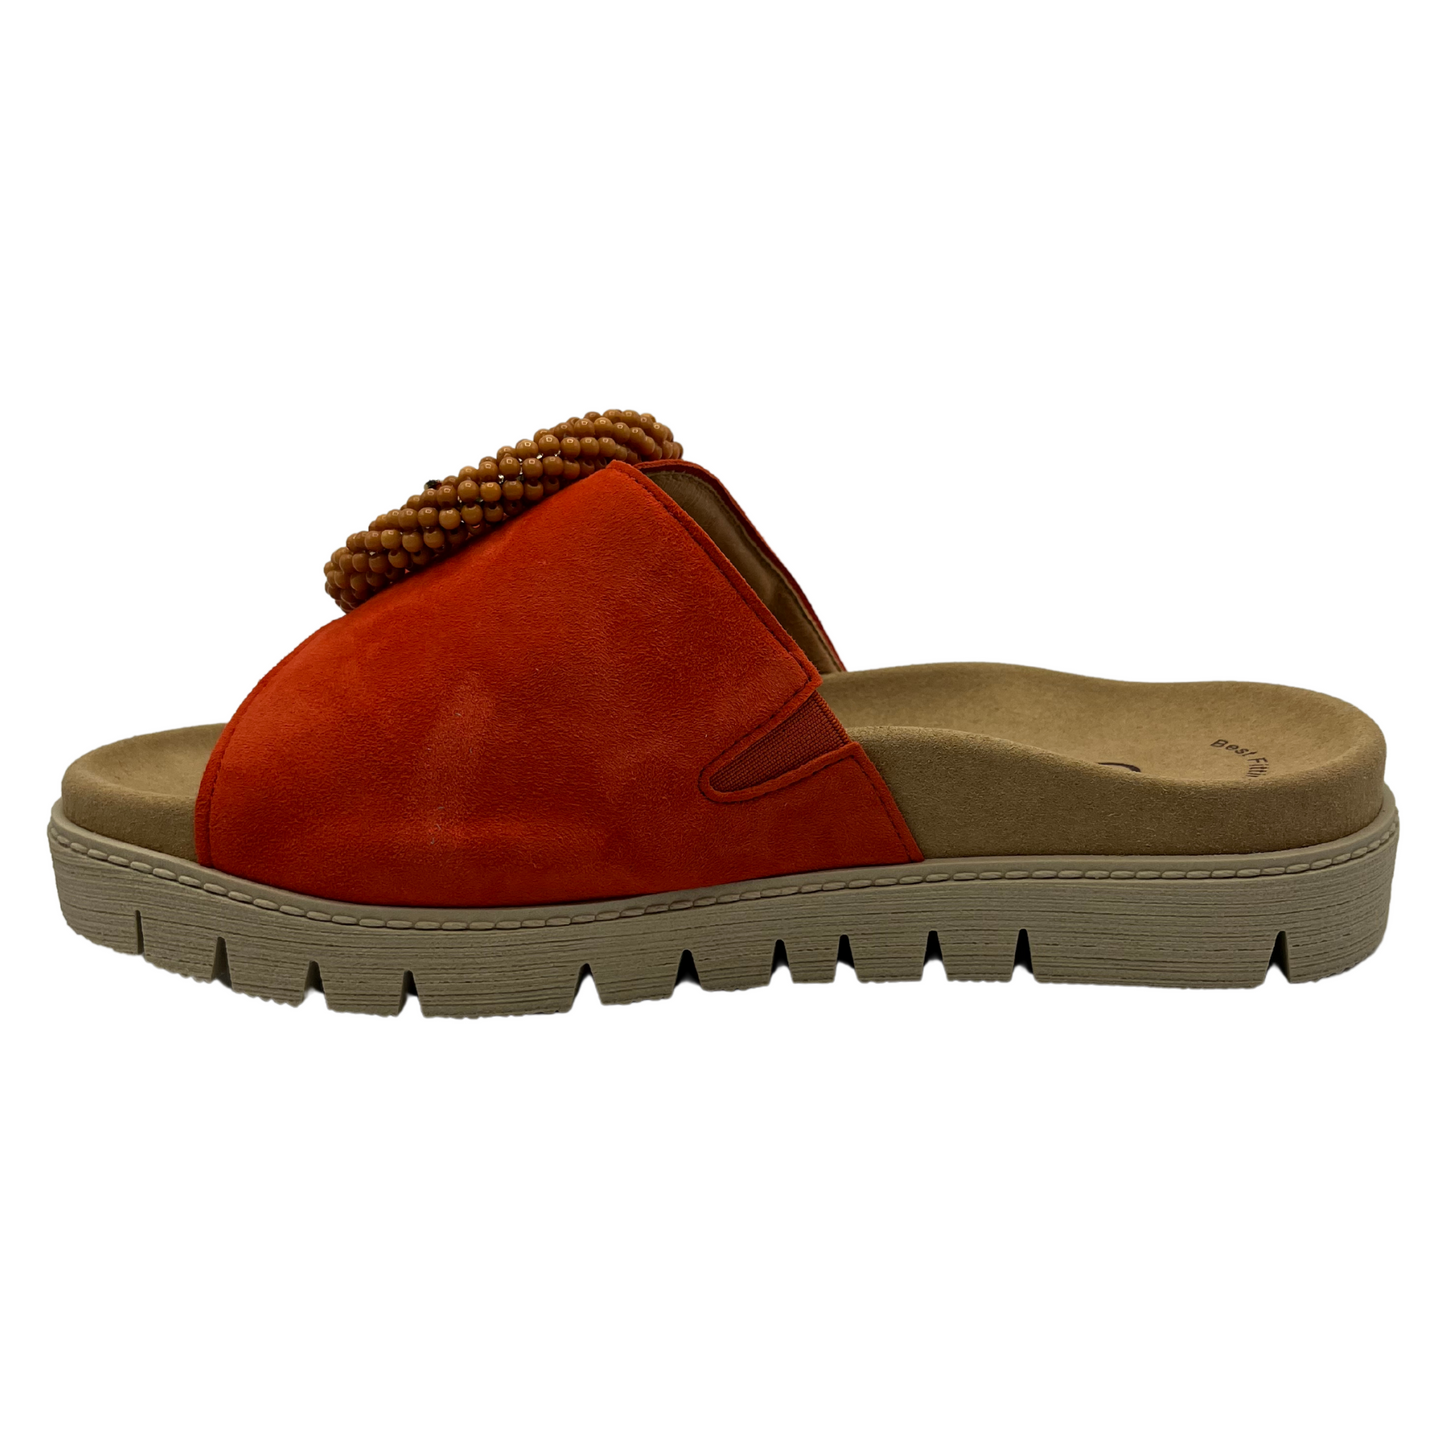 Left facing view of orange suede slide with large buckle detail and anatomical footbed